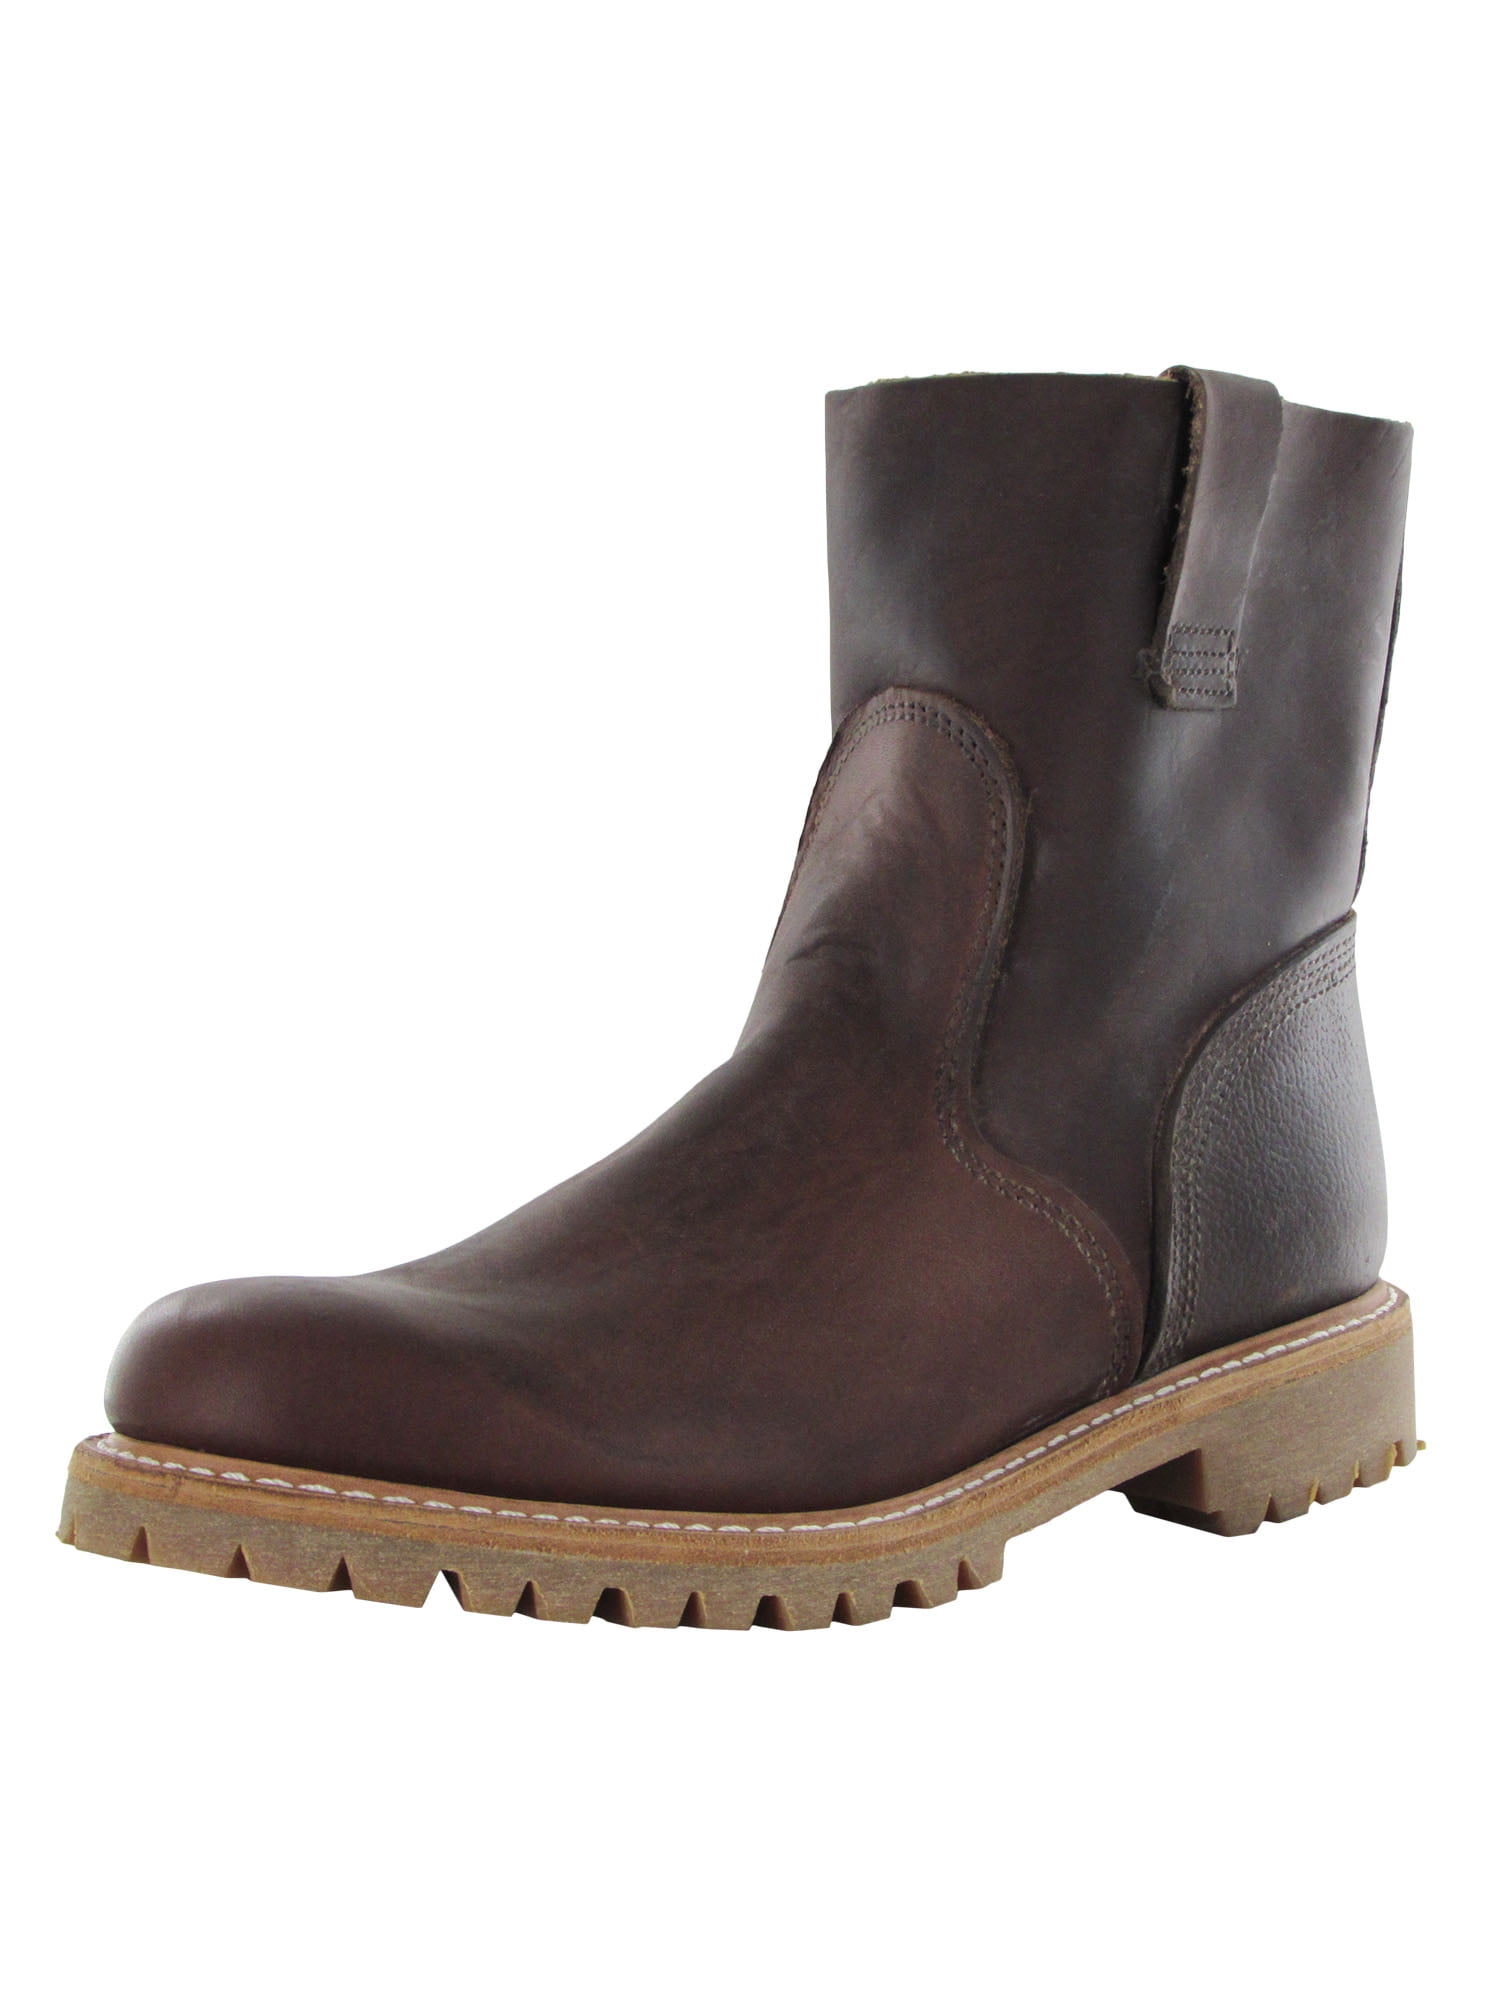 Timberland Mens Pull On Boots - Walmart 